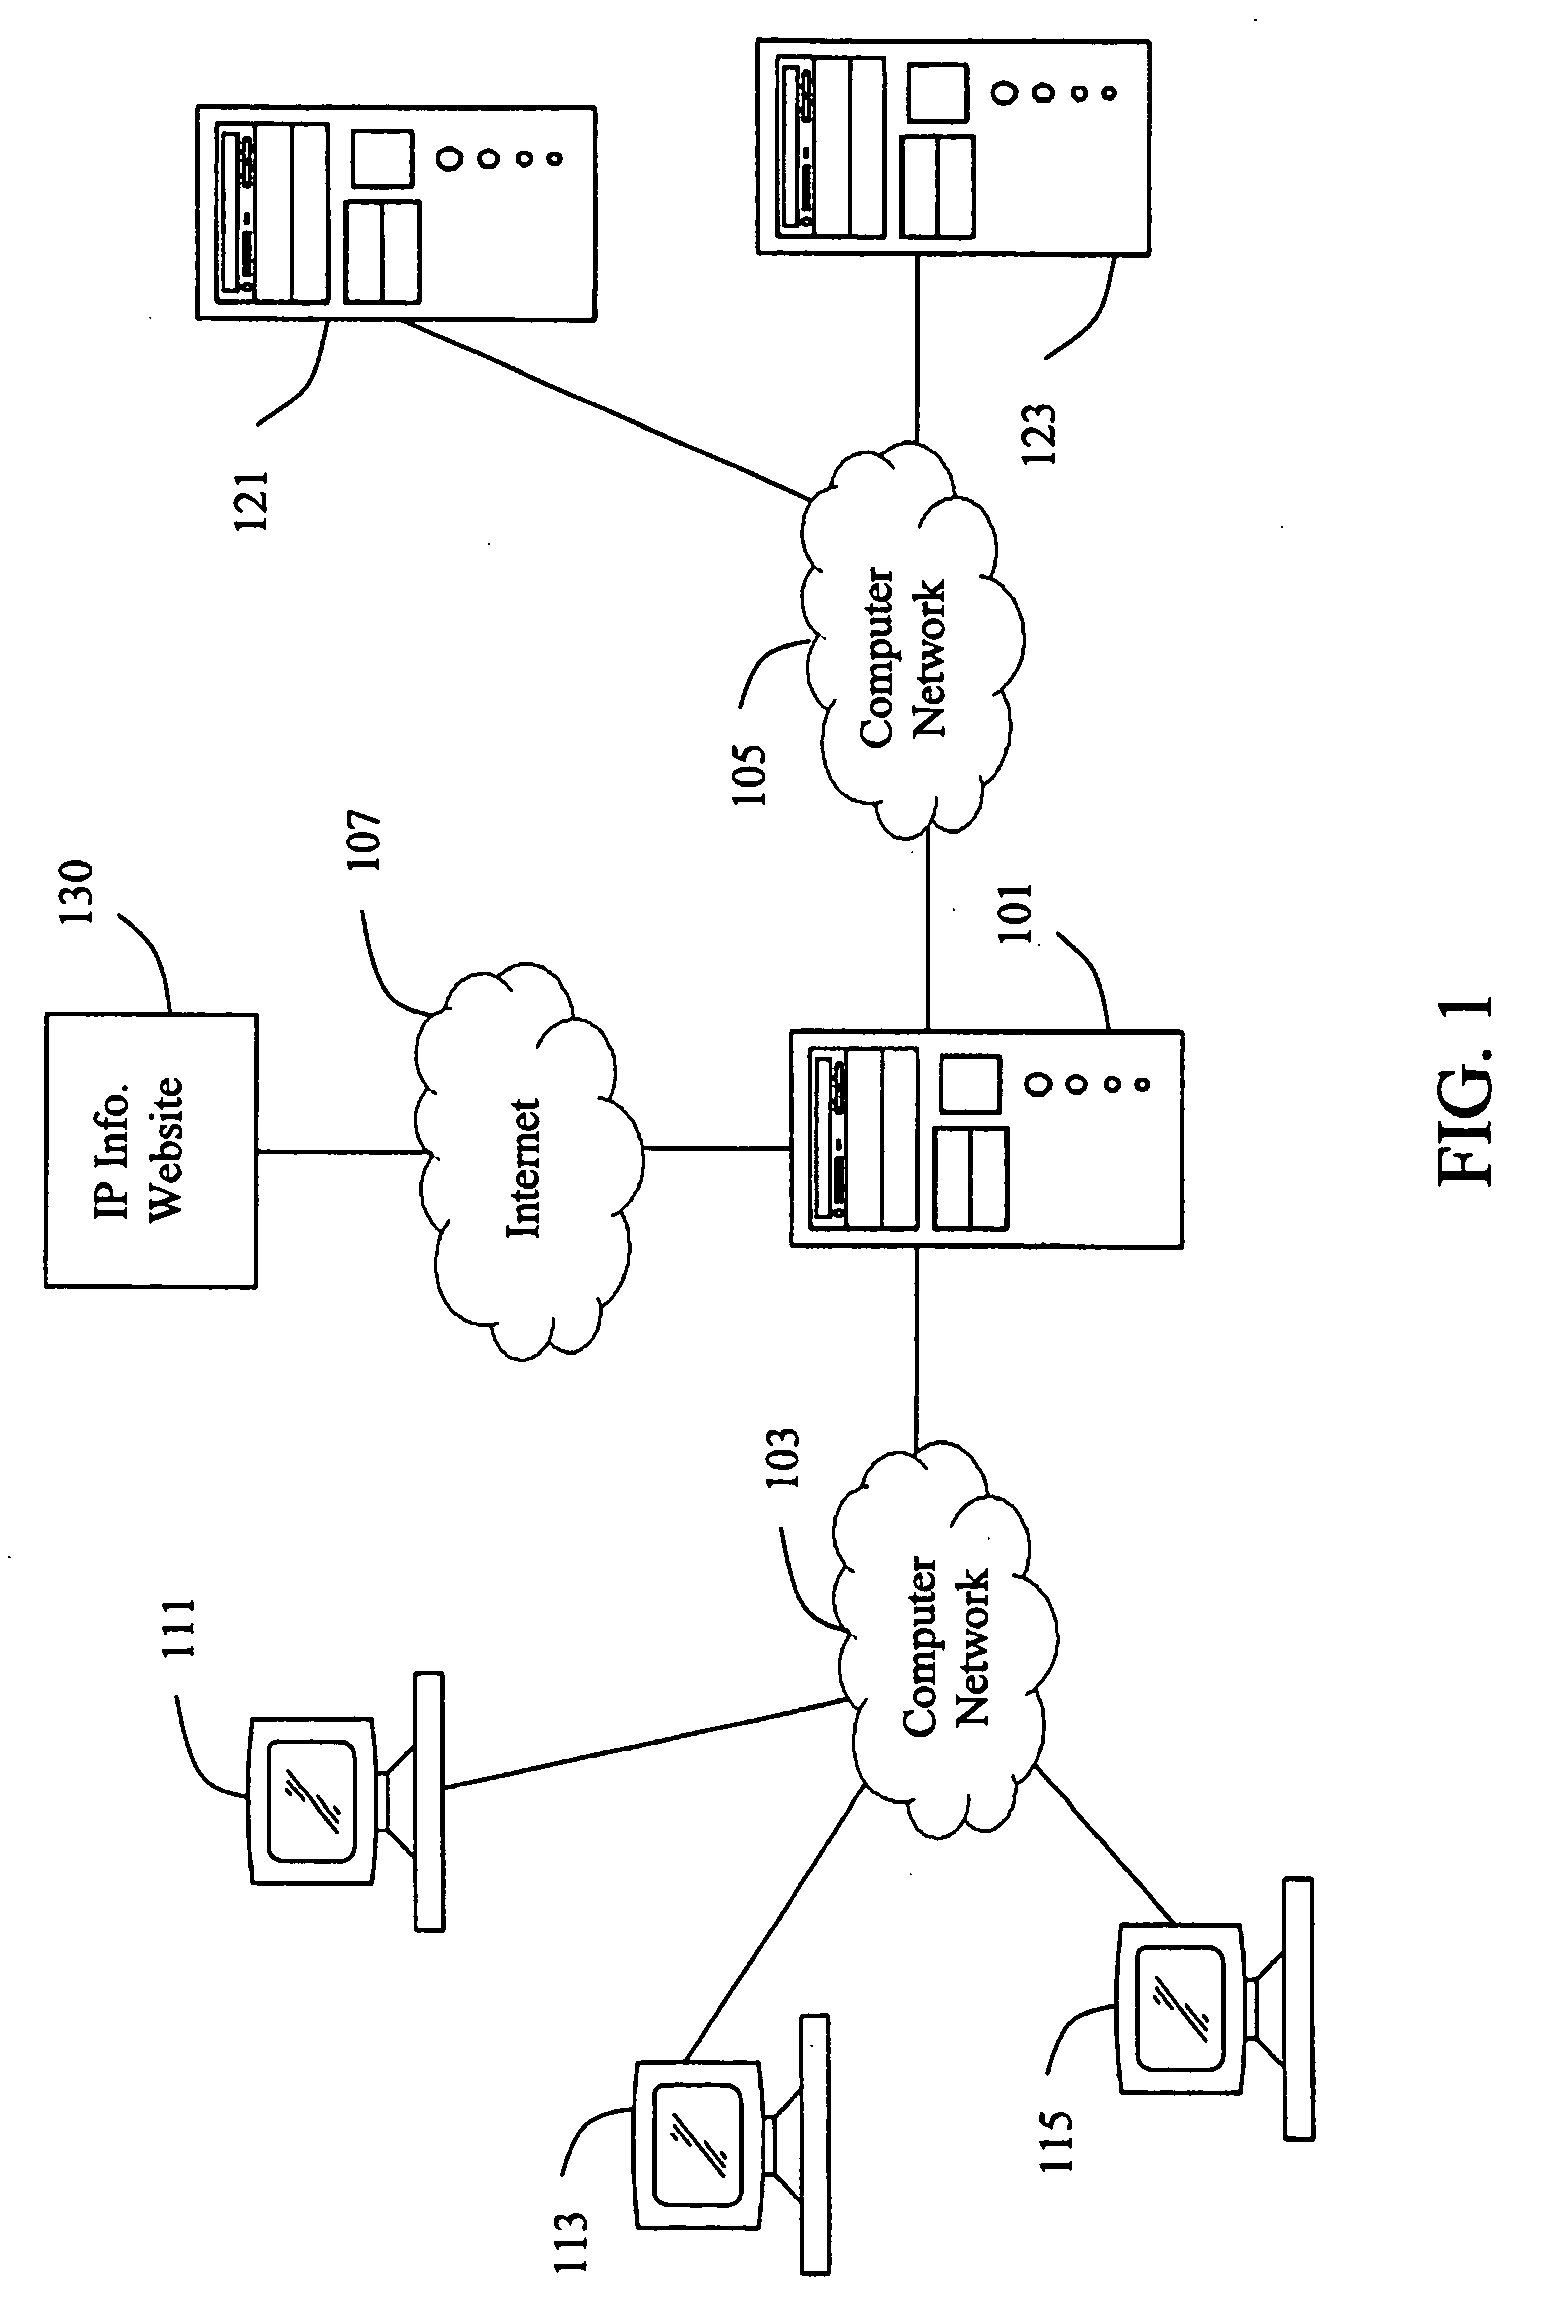 System and method for displaying patent classification information